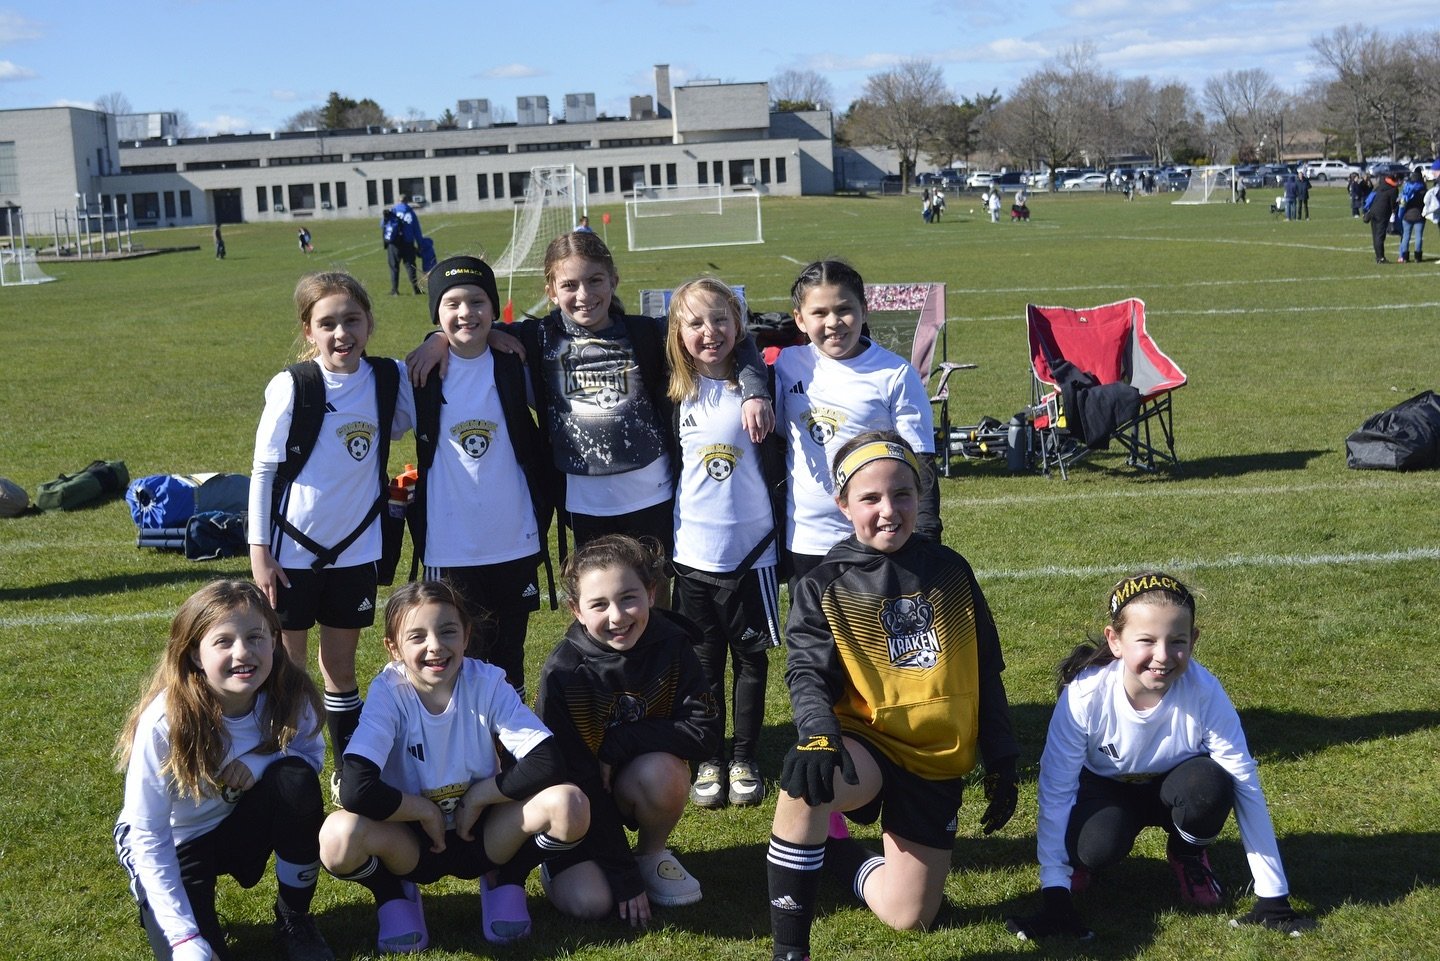 Two games&hellip; two wins! What an exciting weekend for the G15 Kraken 👏🏼⚽️ #CommackSoccer #CommackSoccerLeague